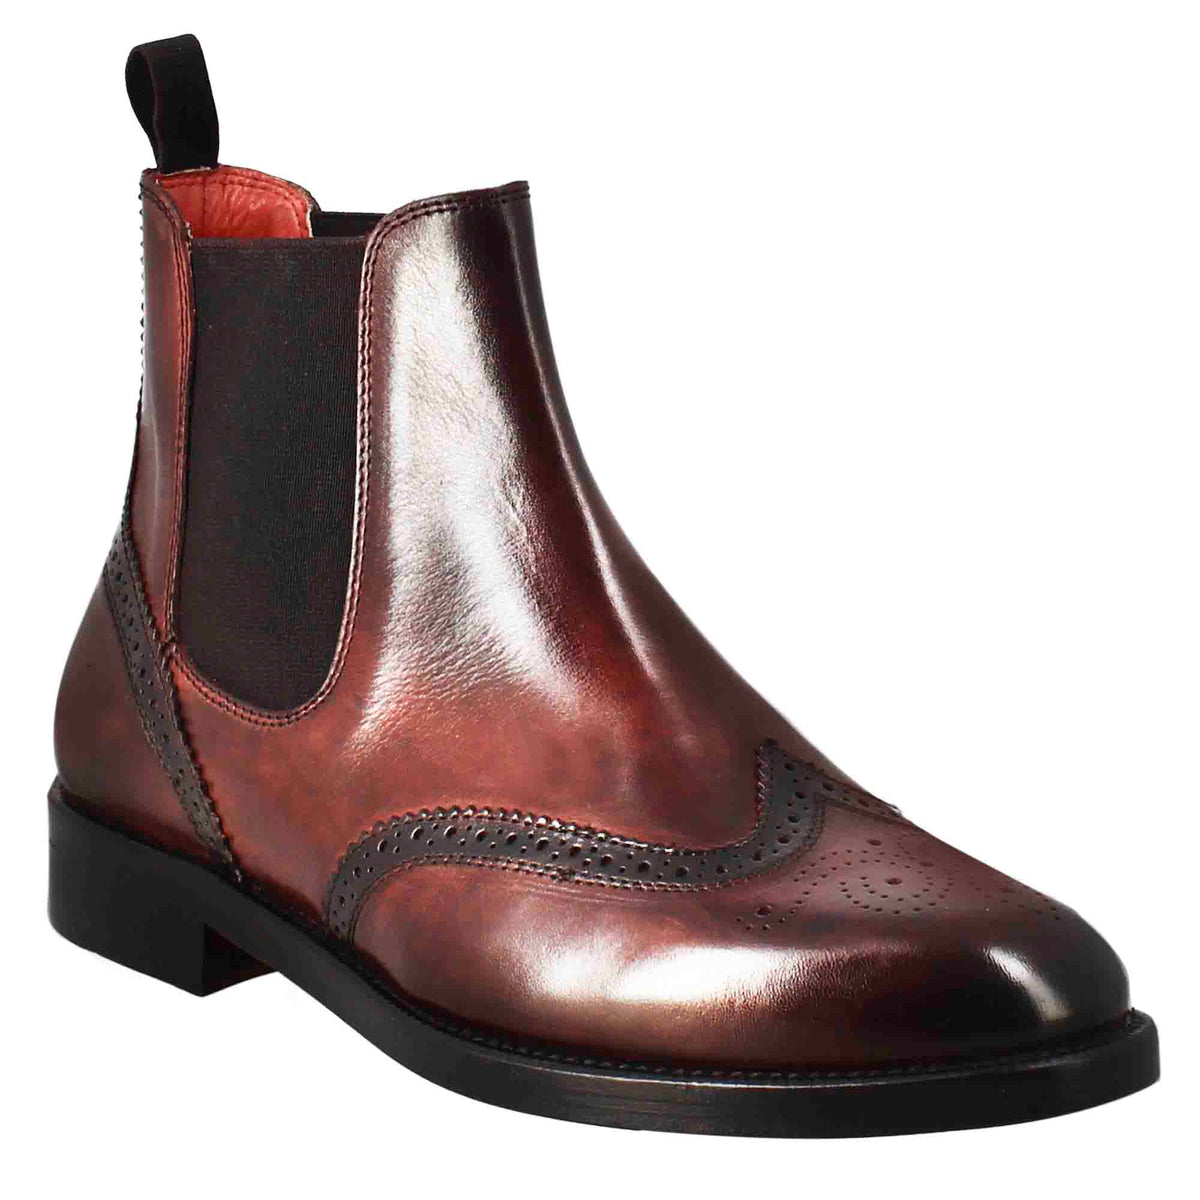 Women's Chelsea boot with brogue details in burgundy leather